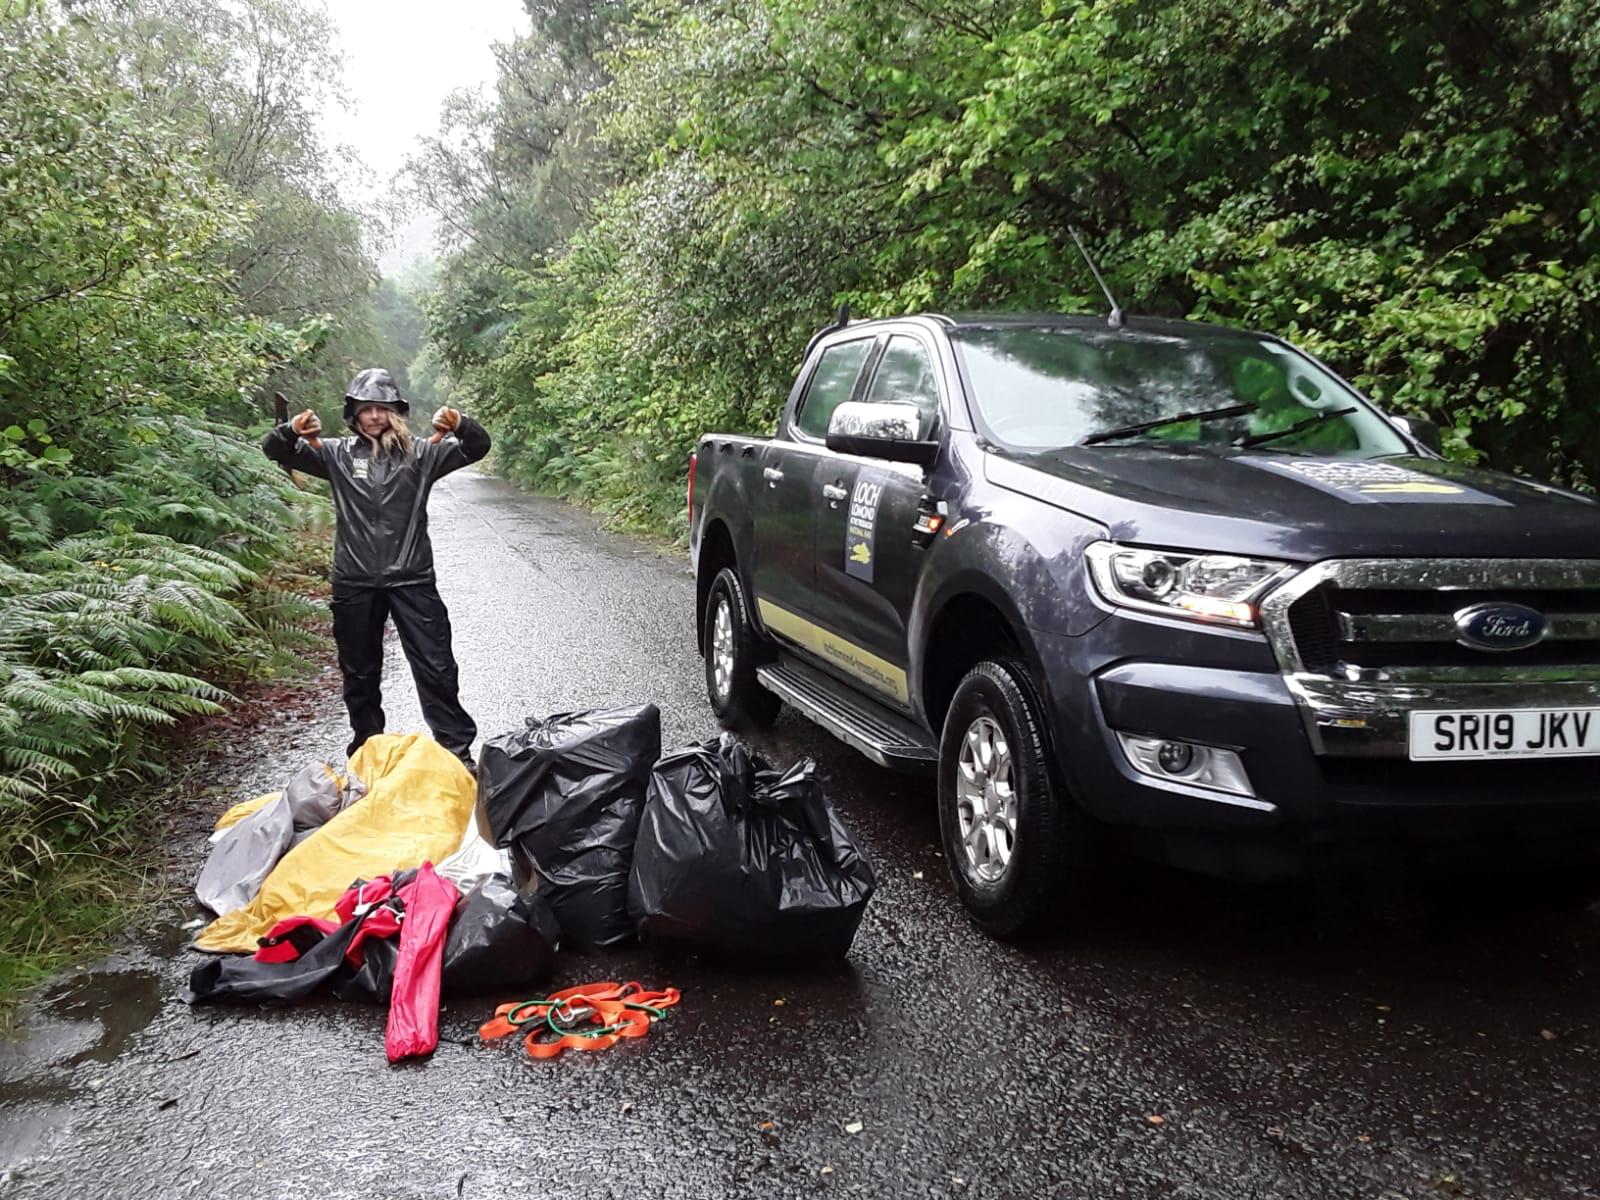 The team collected 81 additional bin bags of waste in just two days. @lomondtrossachs<br>”/><cite class=cite></cite></div><figcaption aria-hidden=true>The team collected 81 additional bin bags of waste in just two days. @lomondtrossachs<br> <cite class=hidden></cite></figcaption></figure><p>They posted images of their rubbish haul on social media and wrote: “Our staff and volunteers are out fighting the tidal wave of litter that has been left in the National Park.</p><p>“In the past two days alone we collected 81 bin bags and assorted camping litter. This is in addition our normal weekly collections.”</p><figure class=